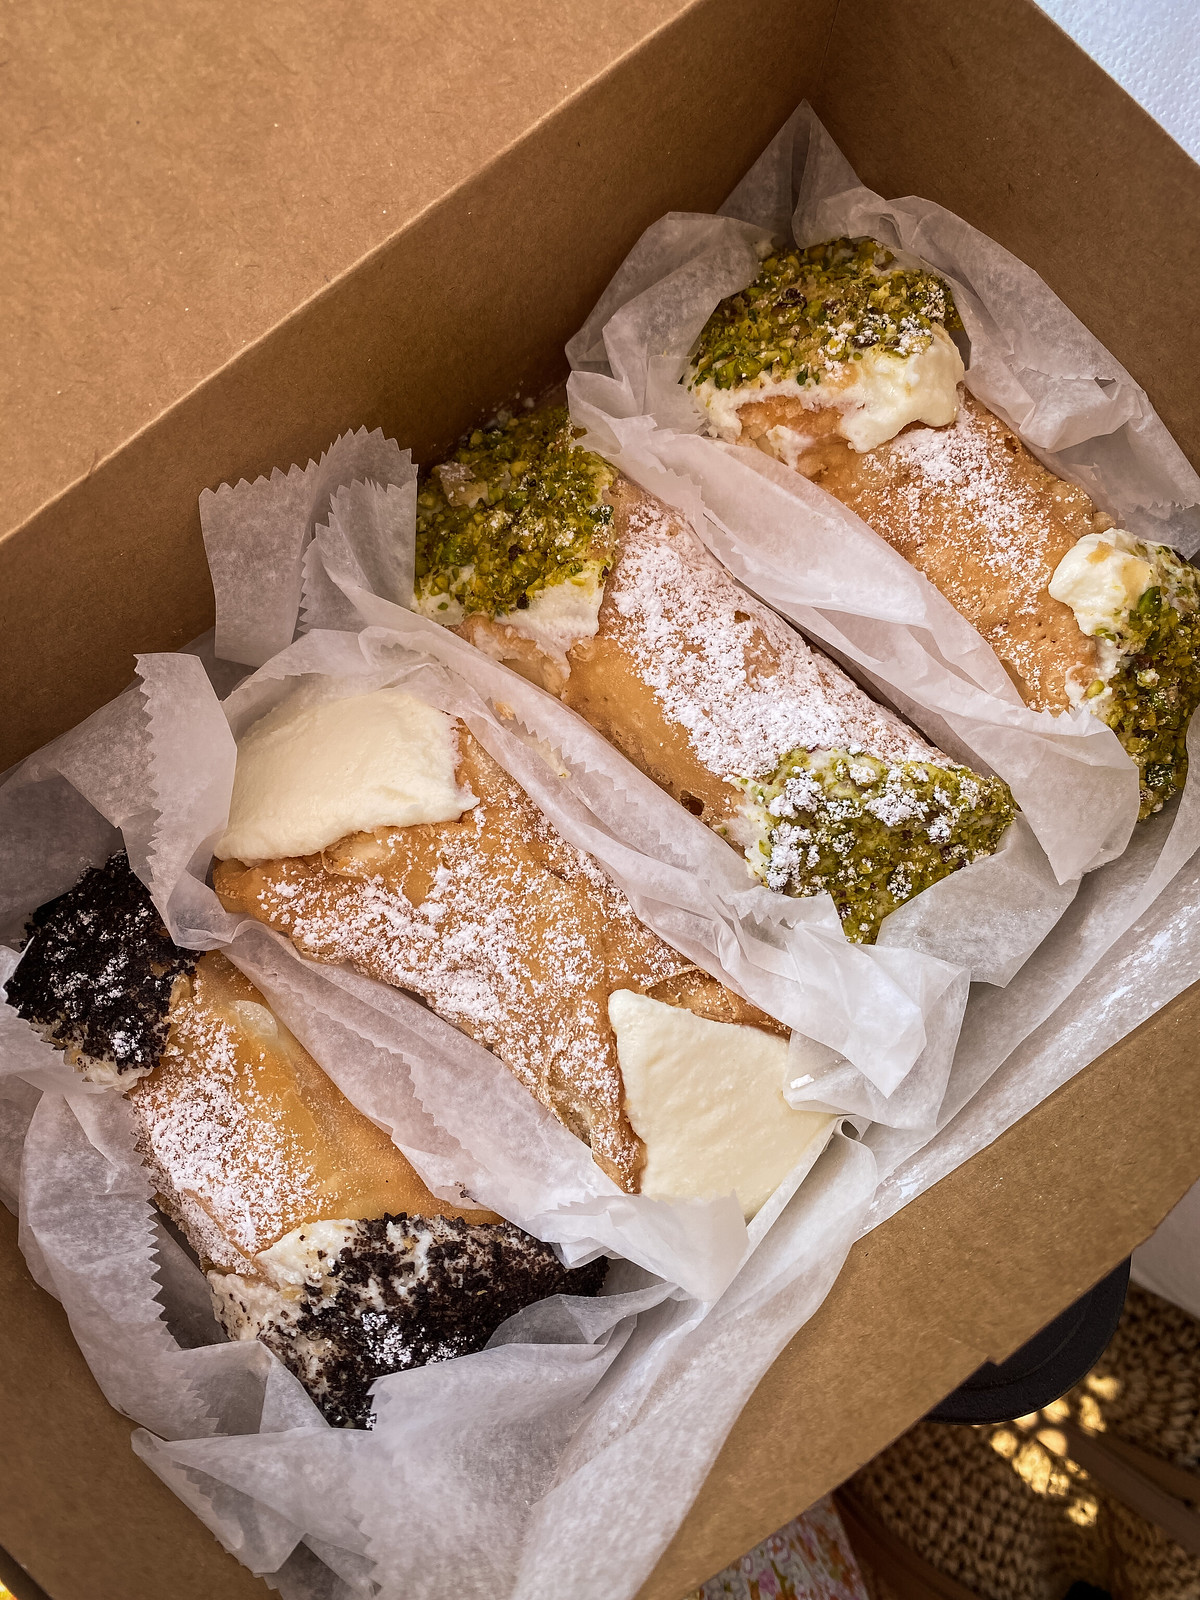 Mike’s Pastry Cannoli North End Little Italy | Best Places to Eat in Boston | 2 Days in Boston | 48 Hours in Boston | The Perfect Weekend Itinerary | Best Things to Do in Boston | Explore Boston, MA | Weekend in Boston, Massachusetts | Boston Travel Guide | Top Things to Eat in Boston